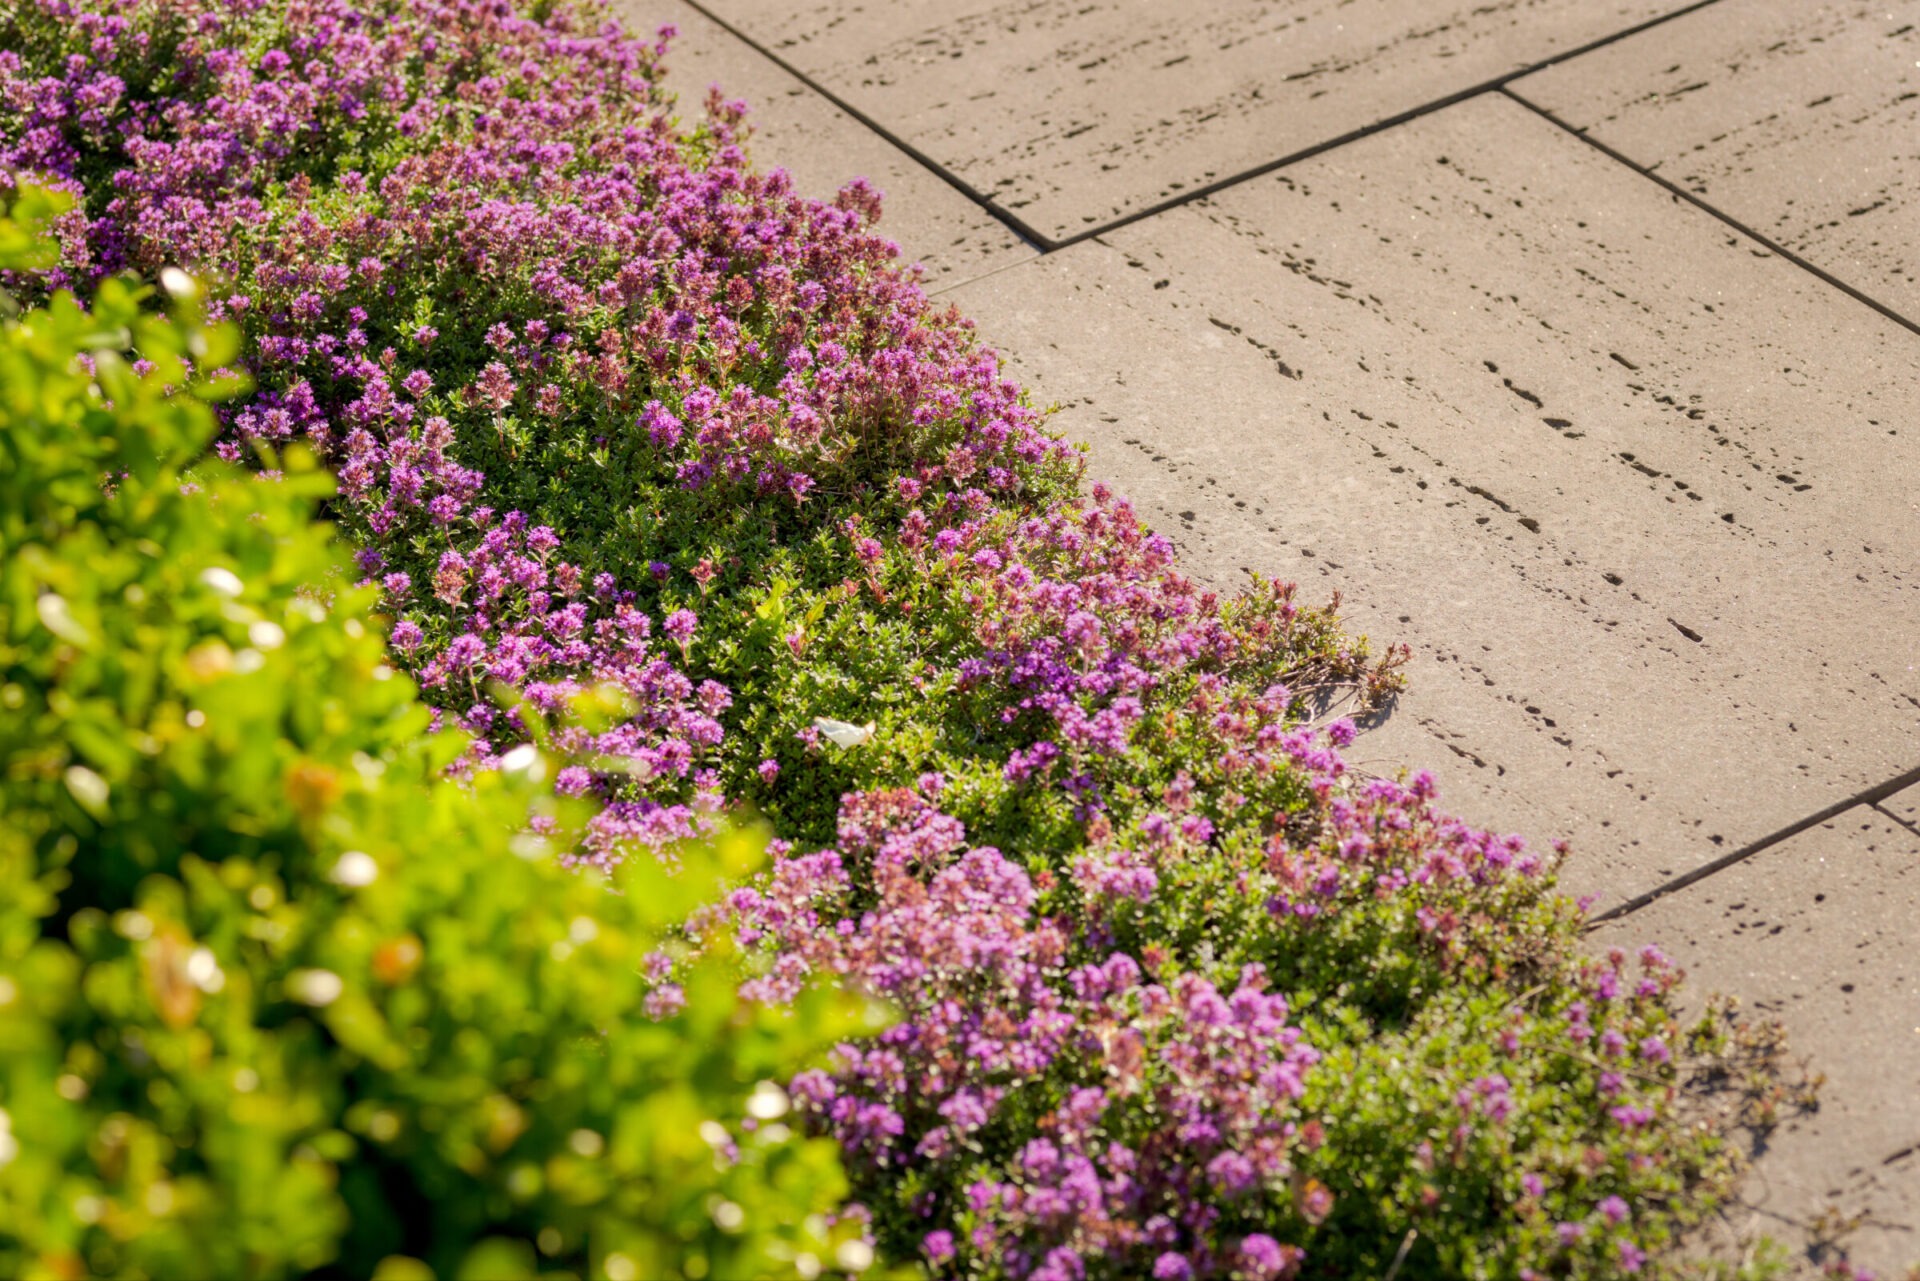 A vibrant garden bed with lush pink flowers beside a concrete footpath, showcasing a contrast between nature and man-made structures in sunlight.